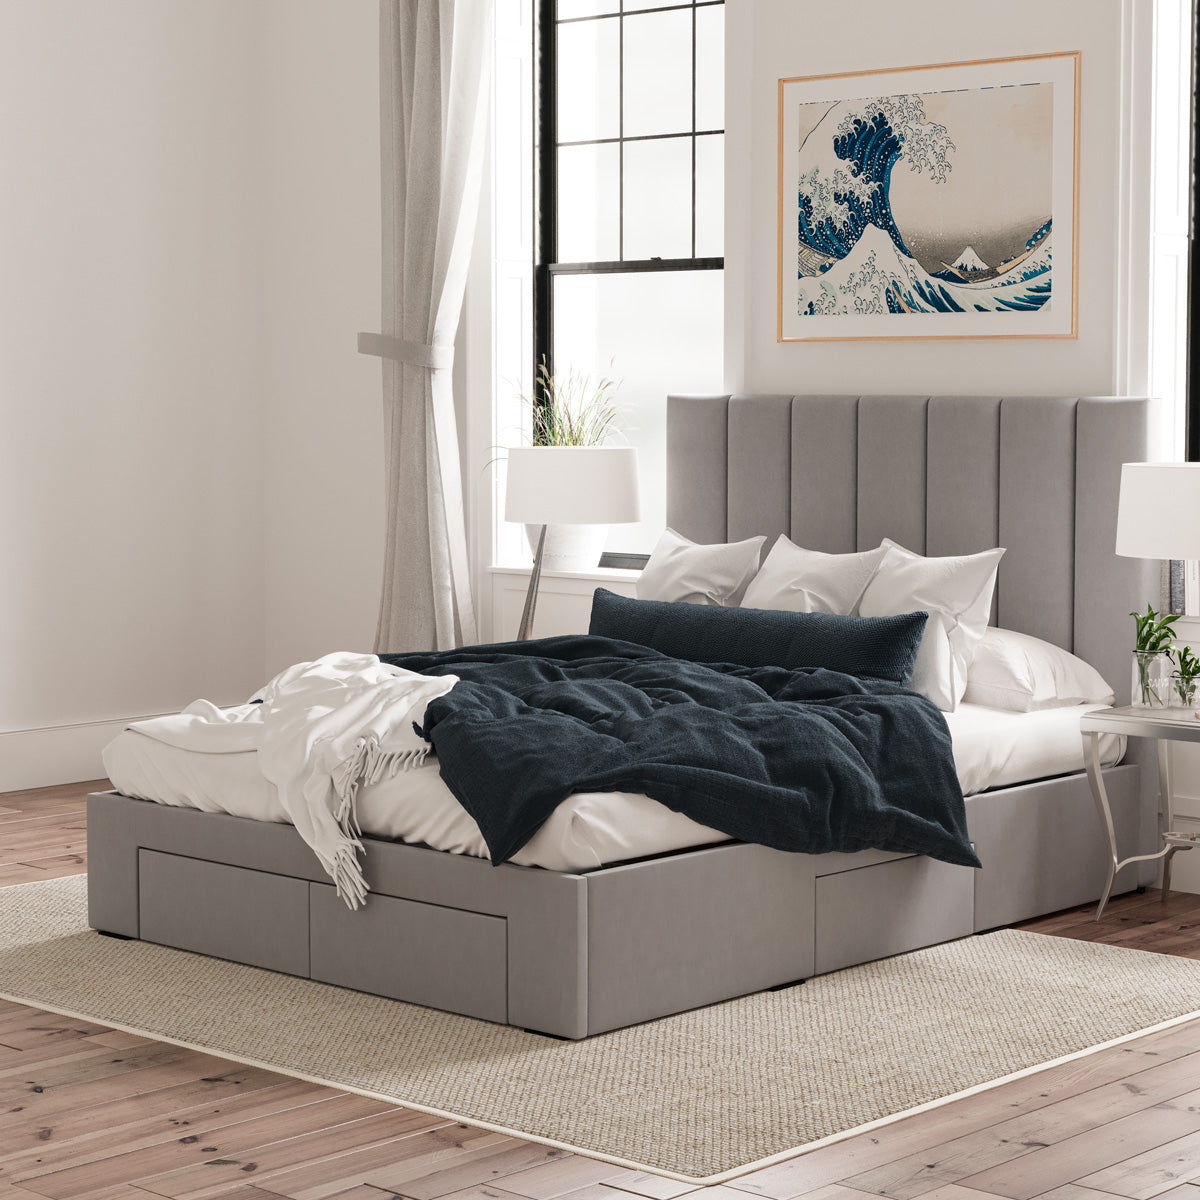 Celine Bed Frame with Four Storage Drawers (Grey Fabric)